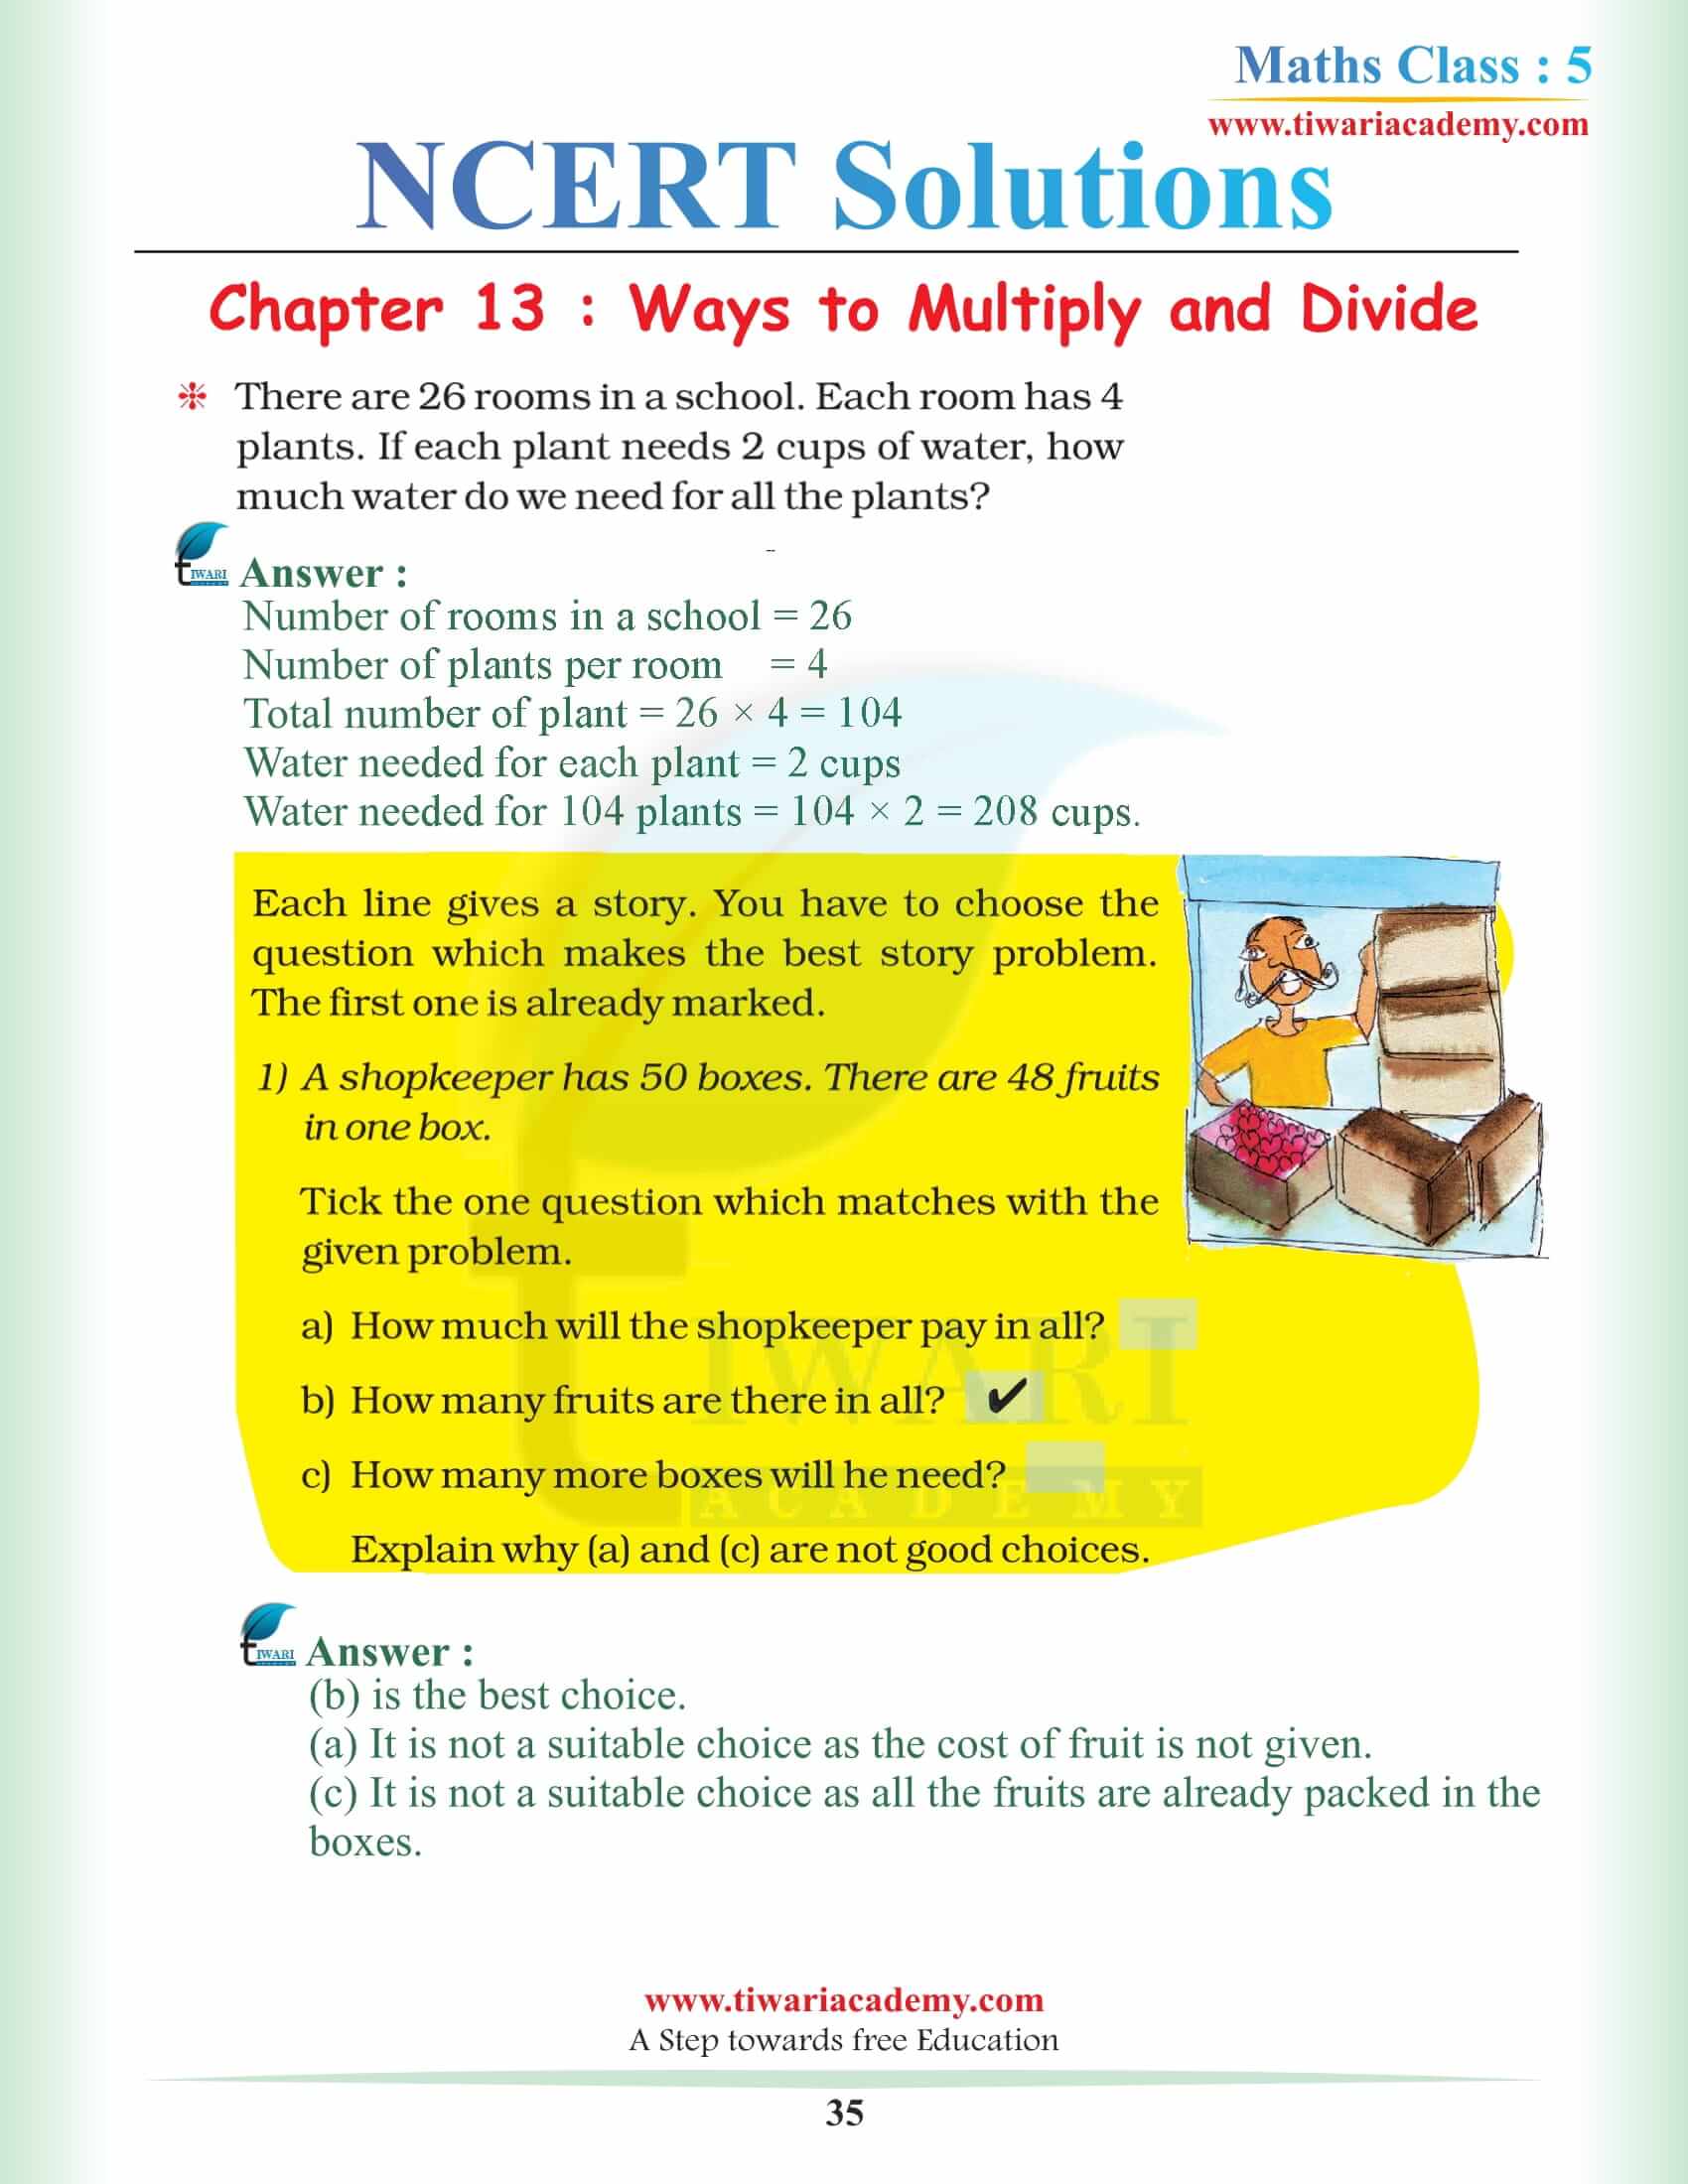 5th Math Chapter 13 NCERT Solutions